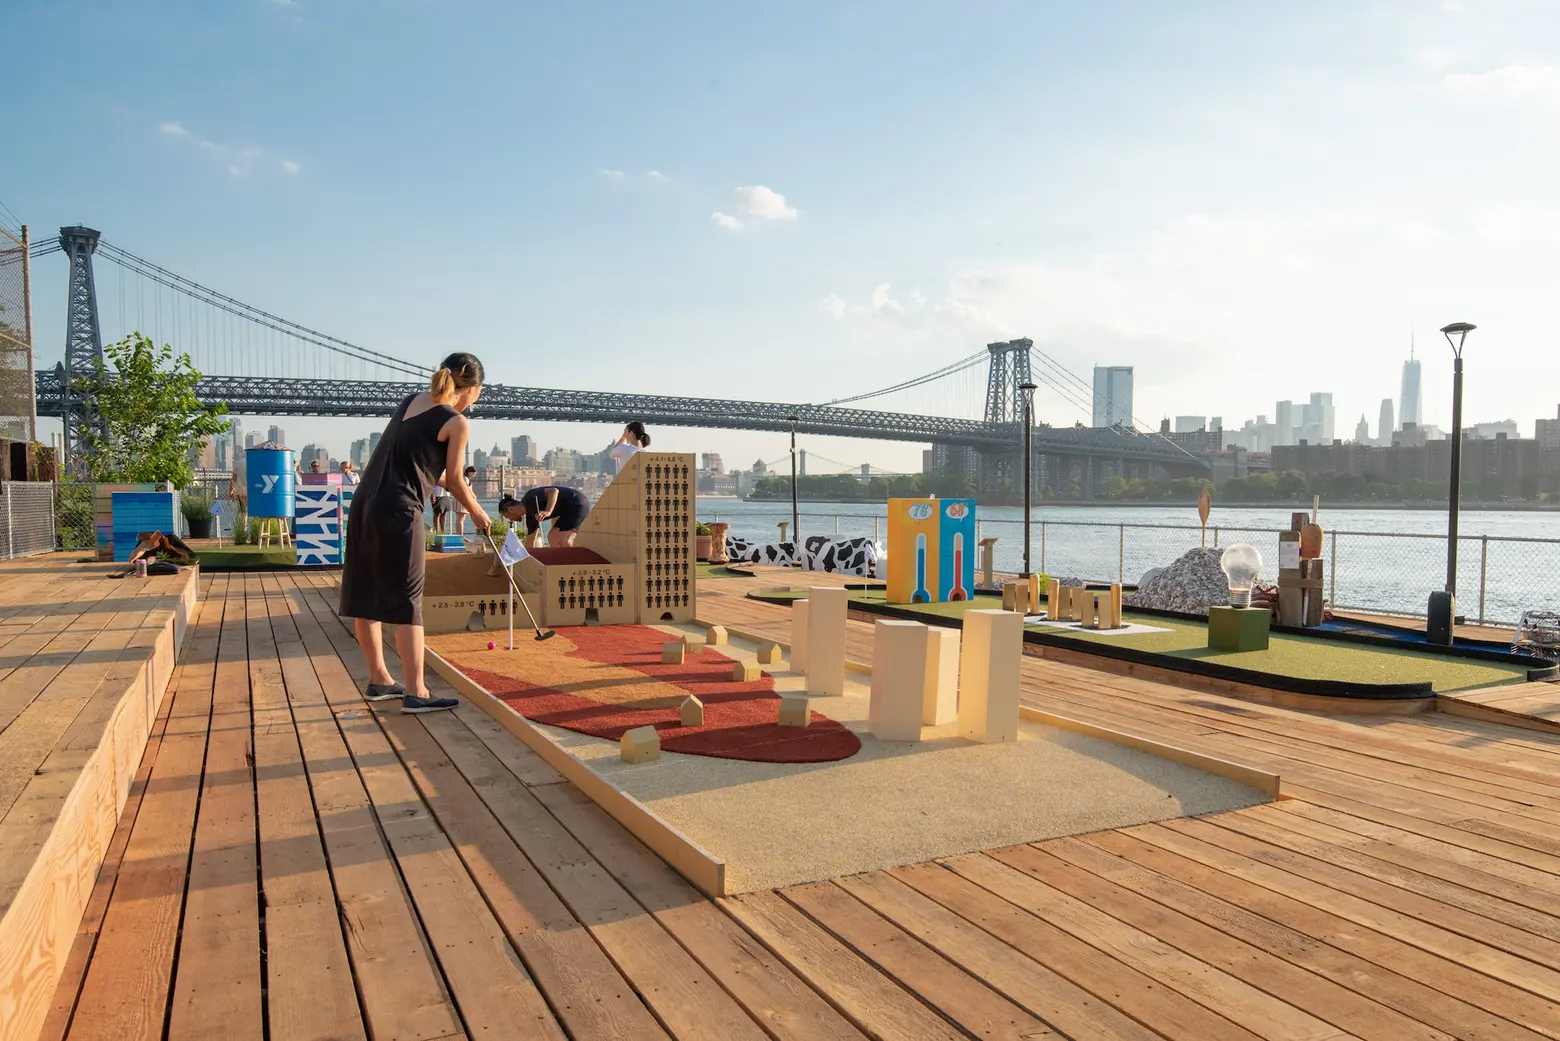 Climate change-themed mini-golf course opens at Two Trees’ waterfront site in Williamsburg